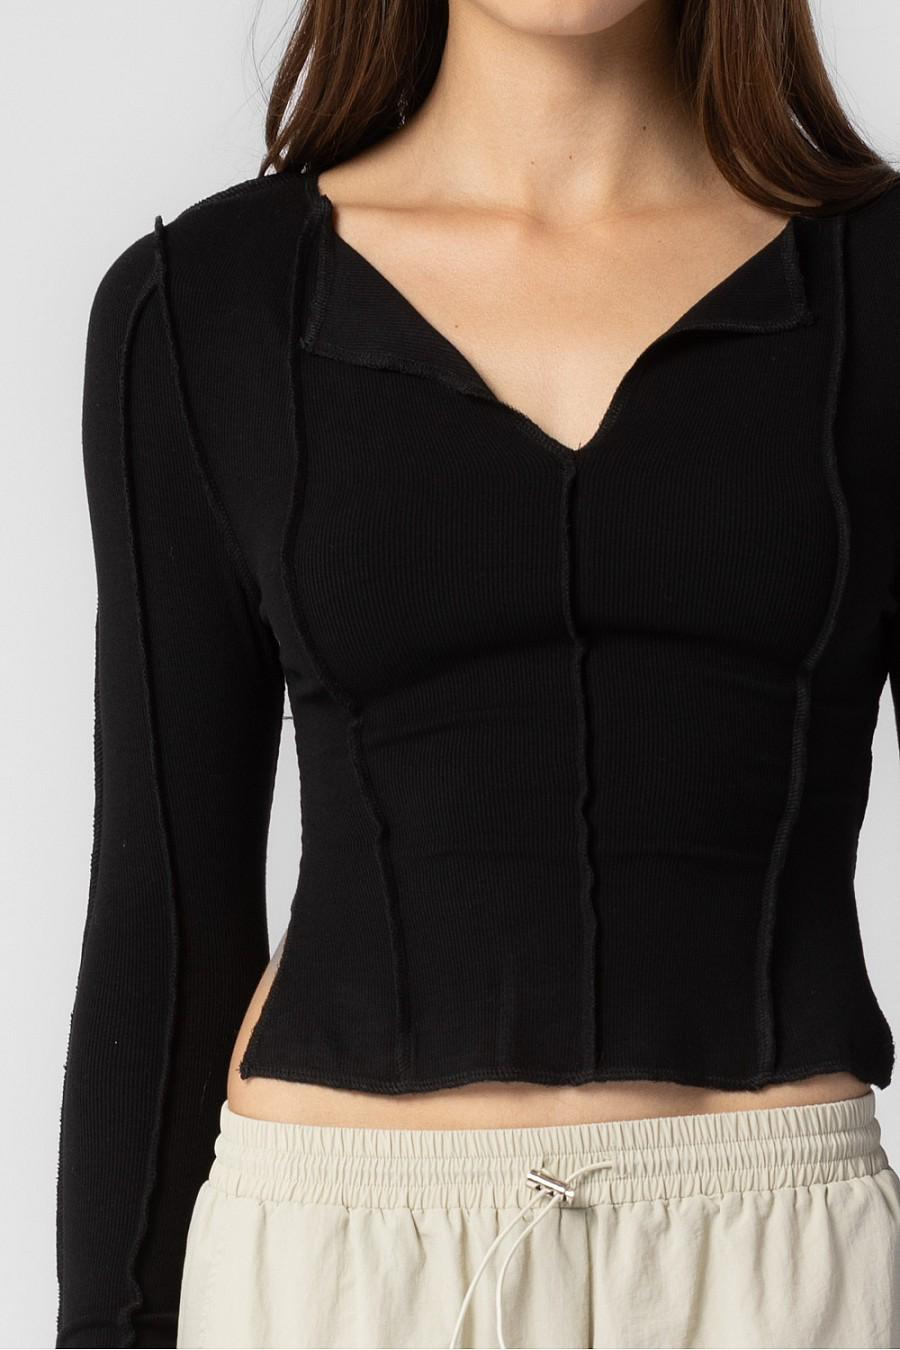 Black long sleeve cropped top with side slits.